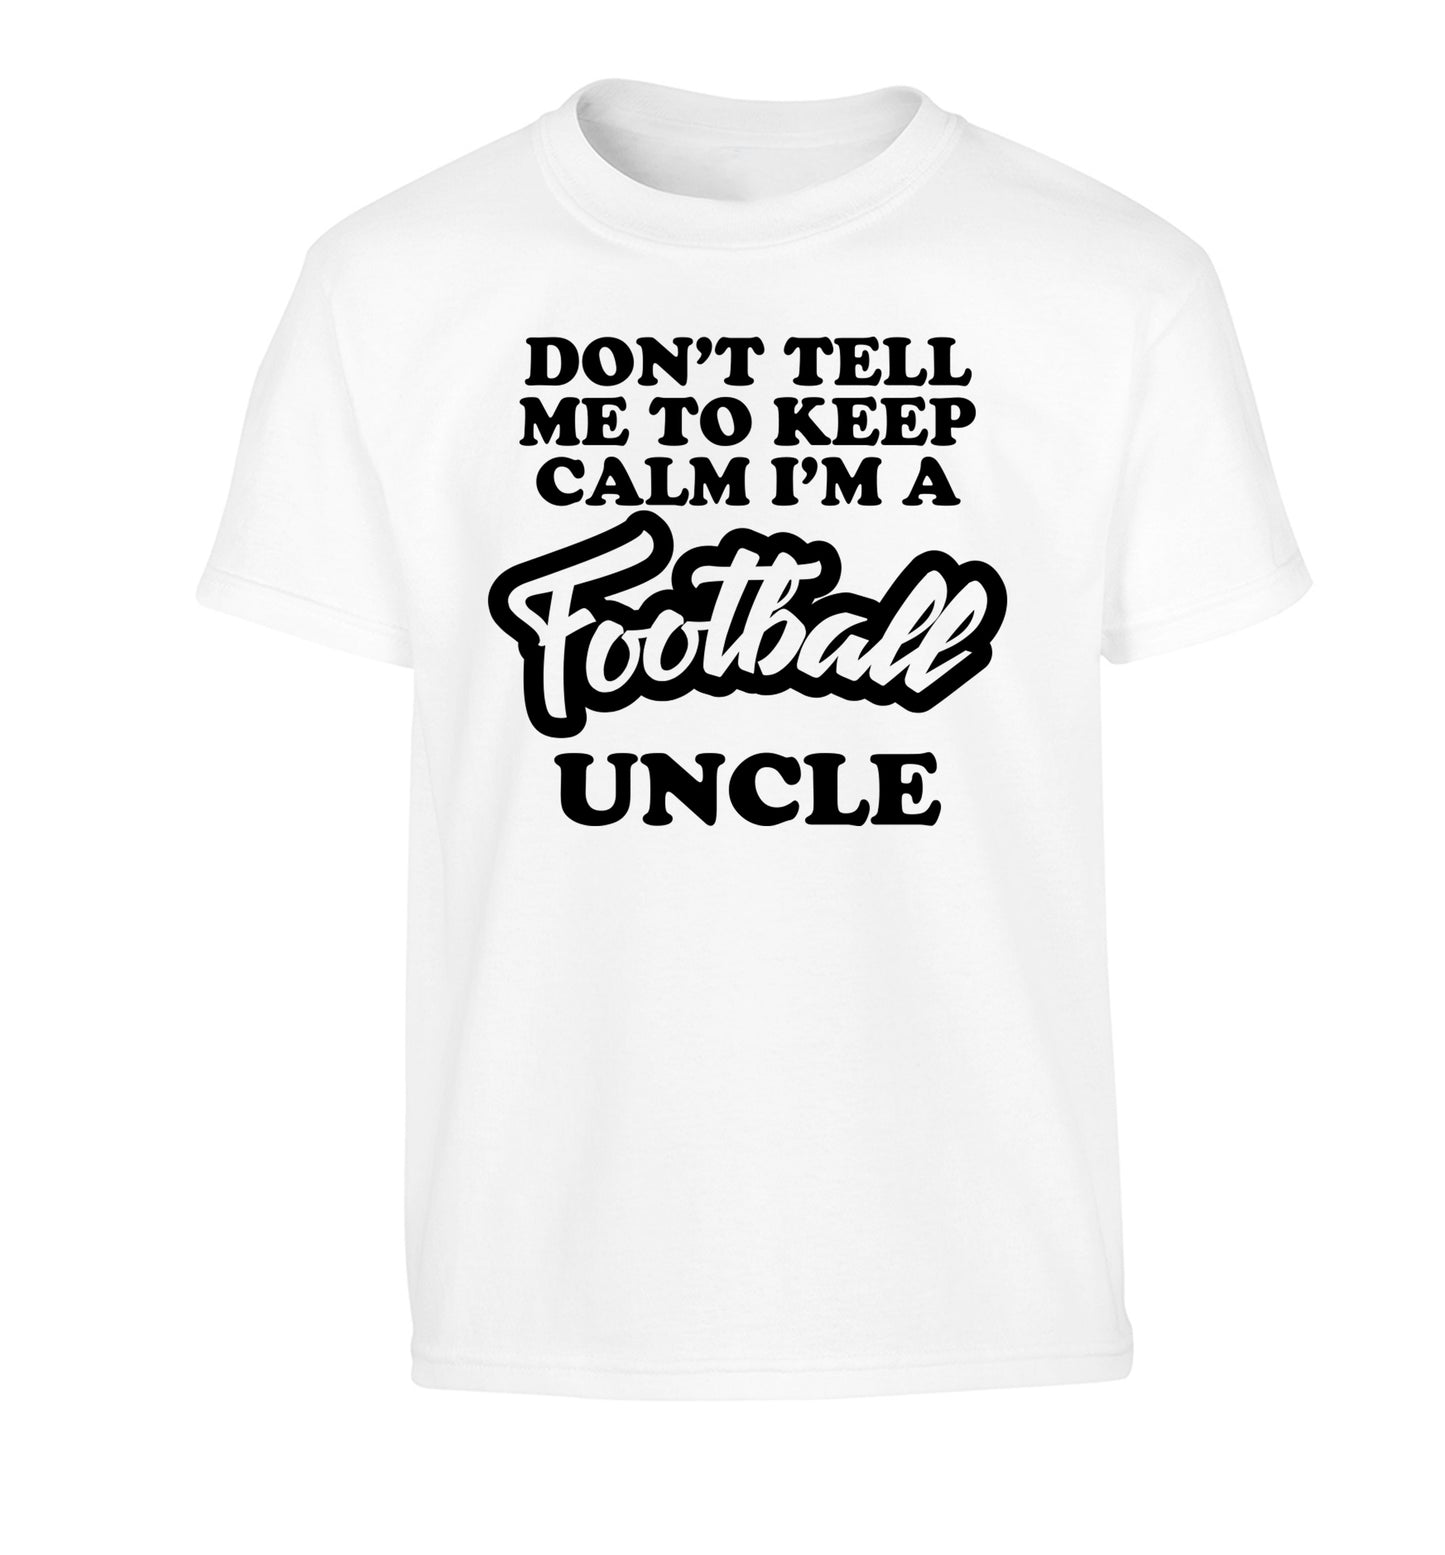 Worlds most amazing football uncle Children's white Tshirt 12-14 Years